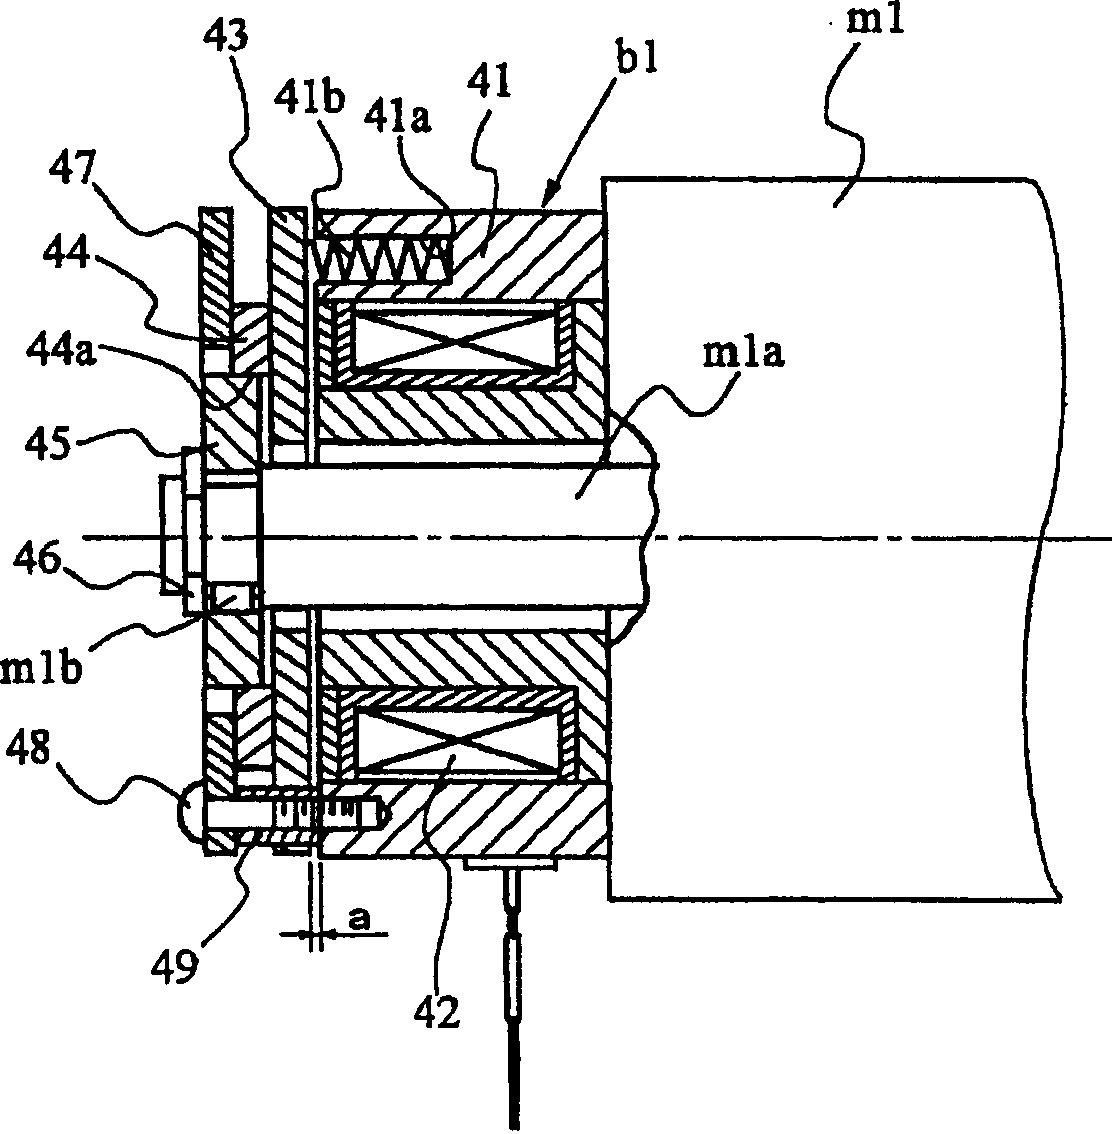 Driving device for terry motion members in cloth-shifting-type pile-loop loom